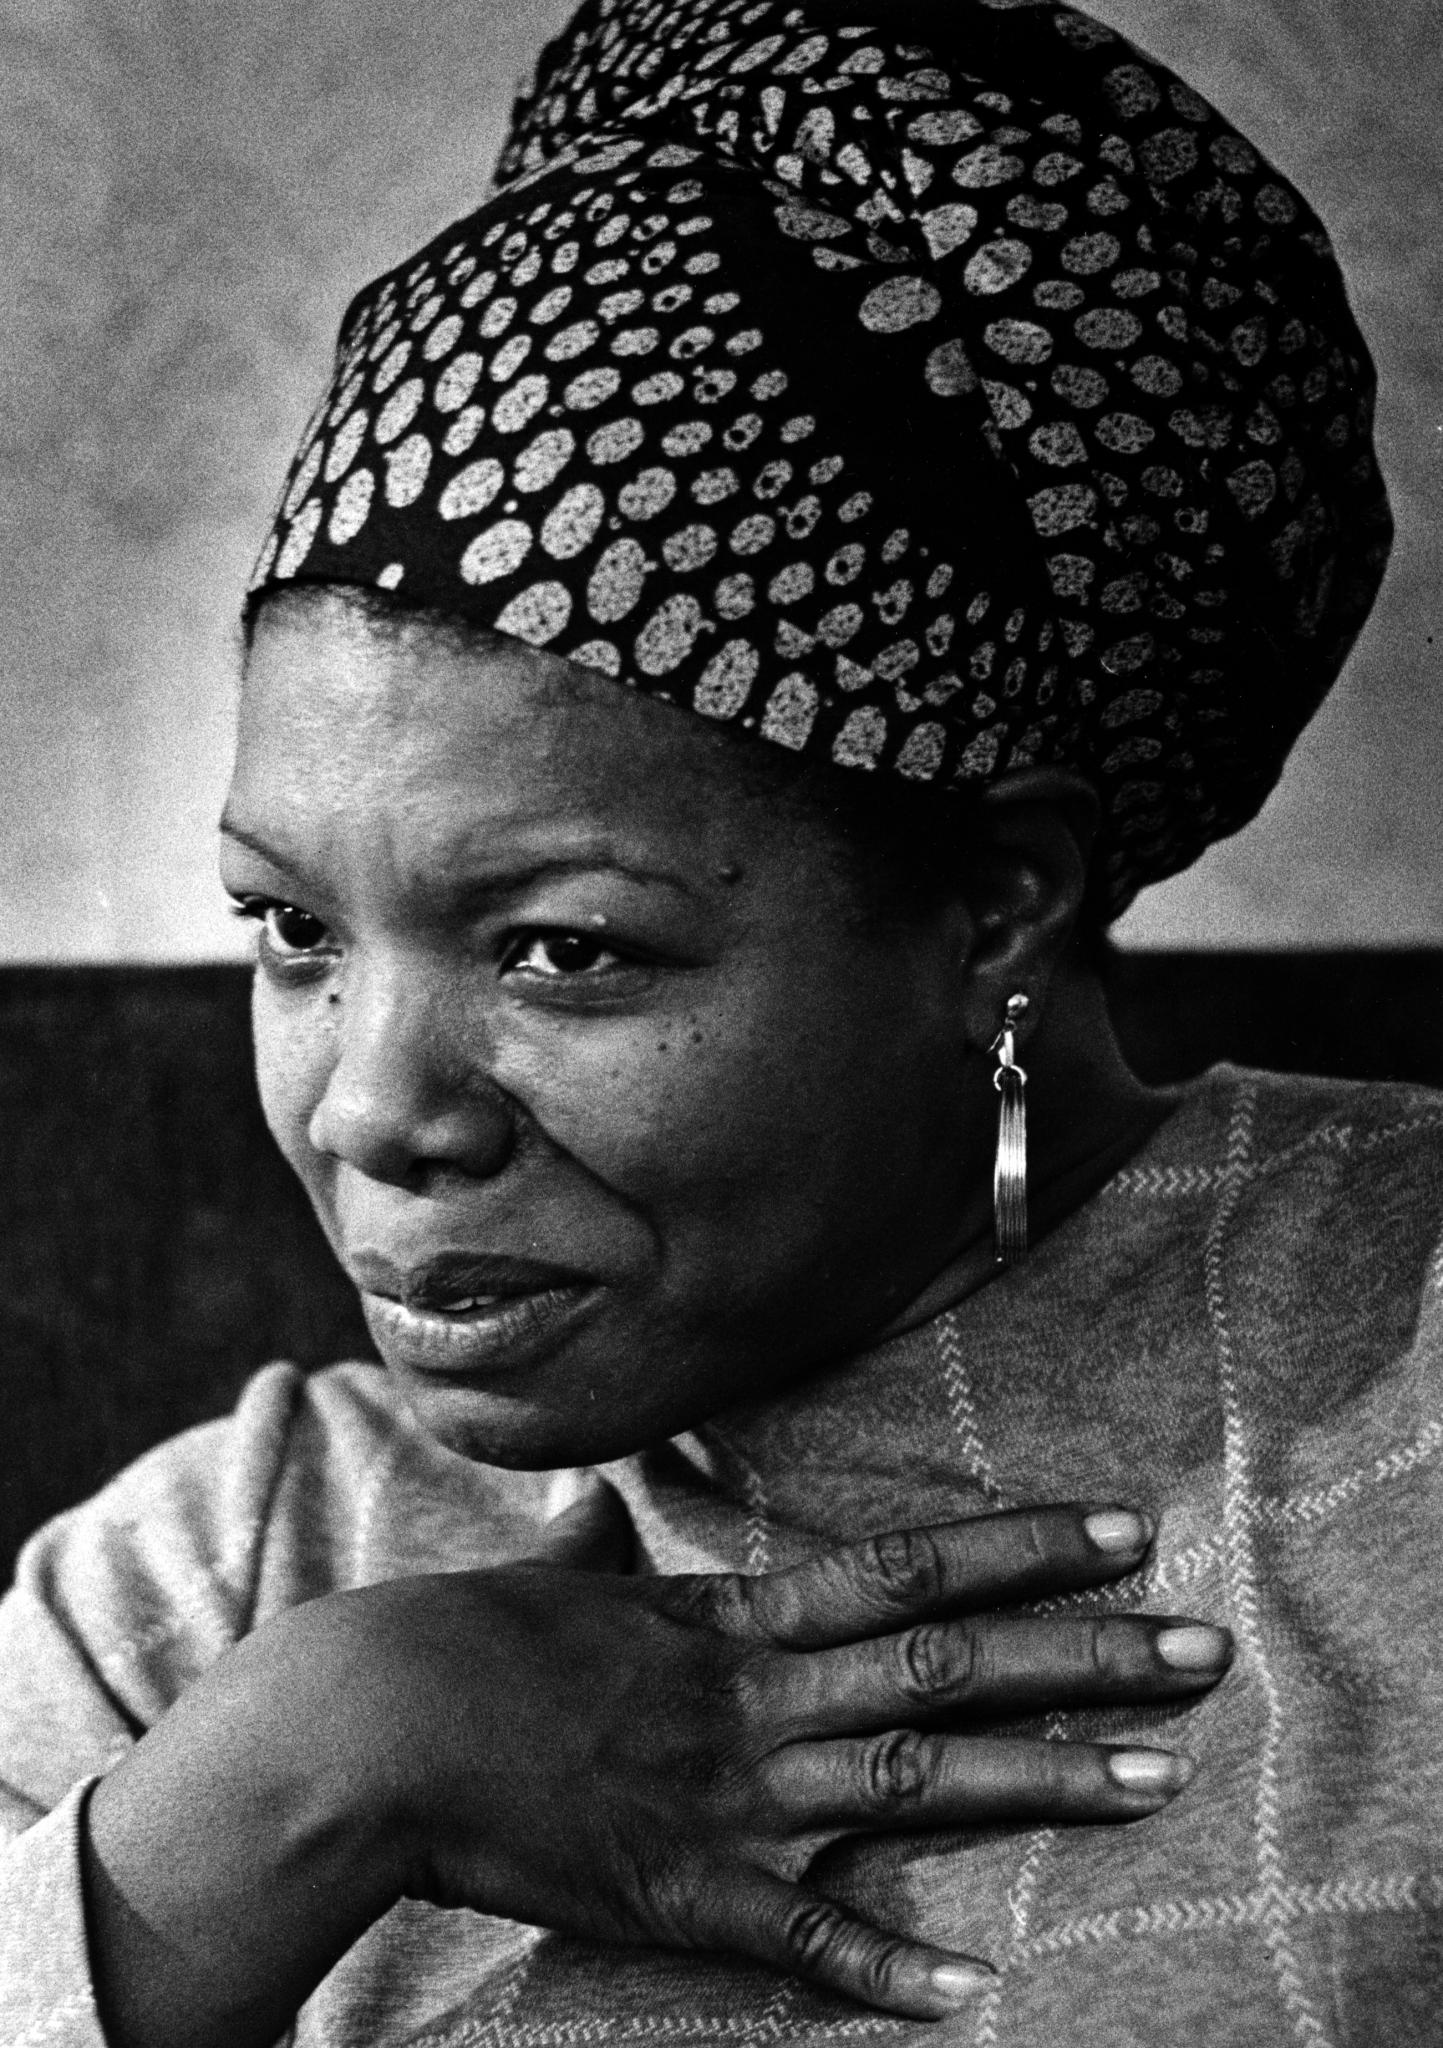 There’s a Kickstarter Campaign for a Maya Angelou Documentary